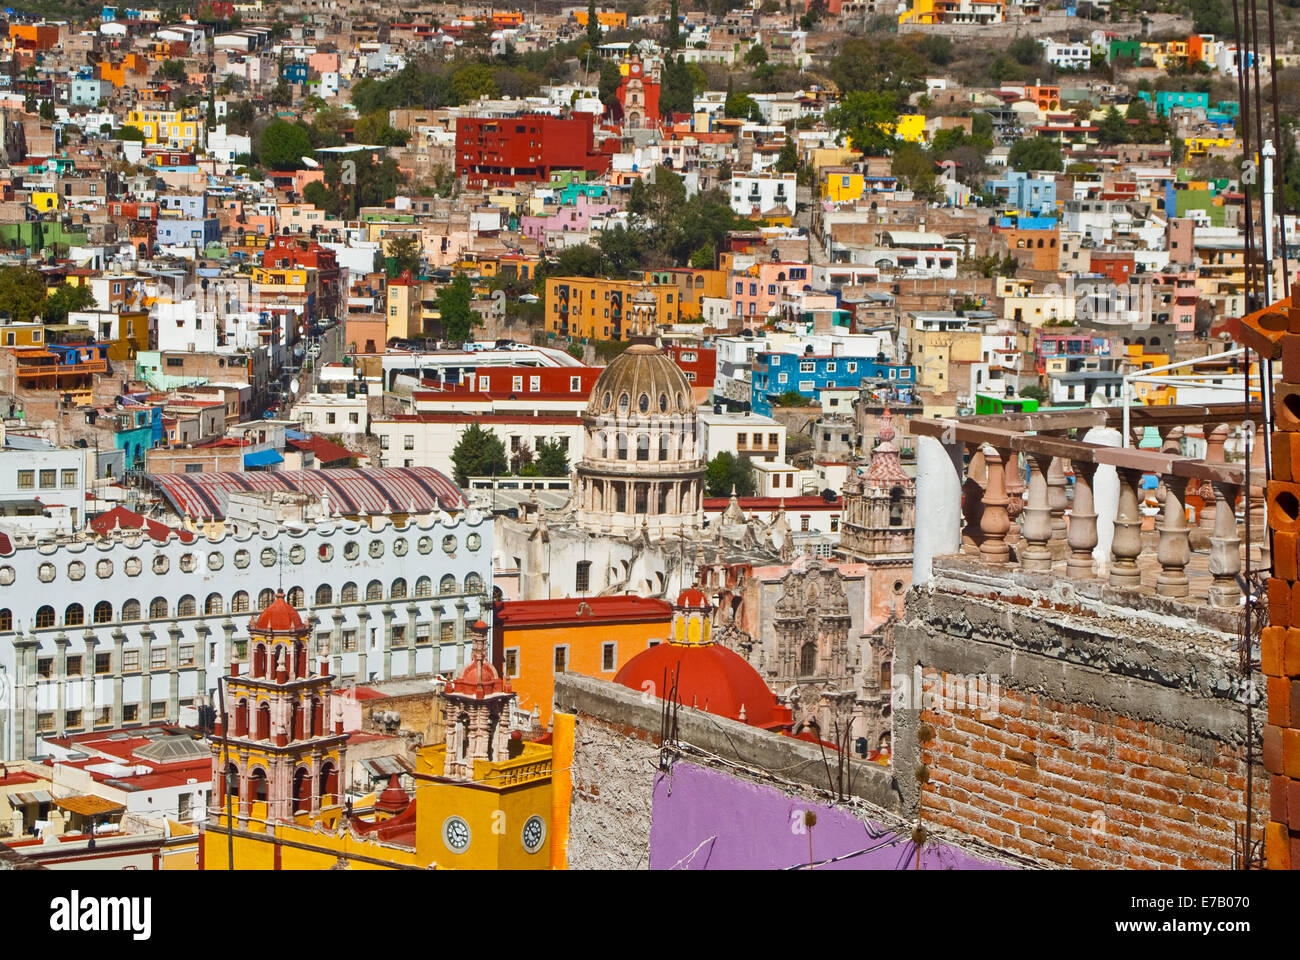 GUANAJUATO, MEXICO - : Guanajuato World Heritage Site, historic city view of 16th century buildings and houses. Stock Photo